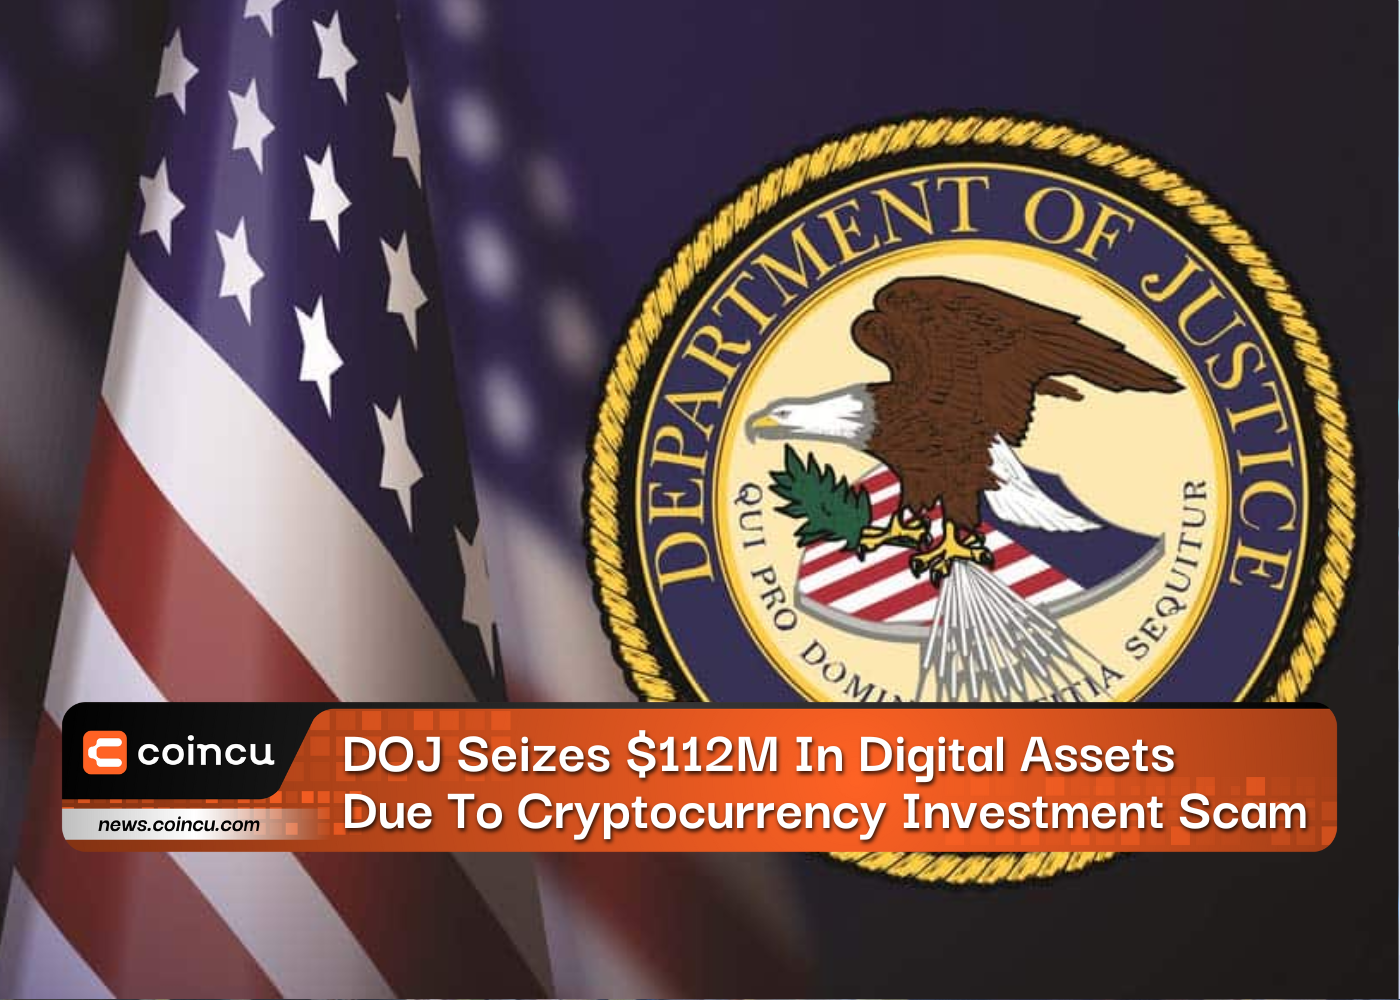 DOJ Seizes $112M In Digital Assets Due To Cryptocurrency Investment Scam